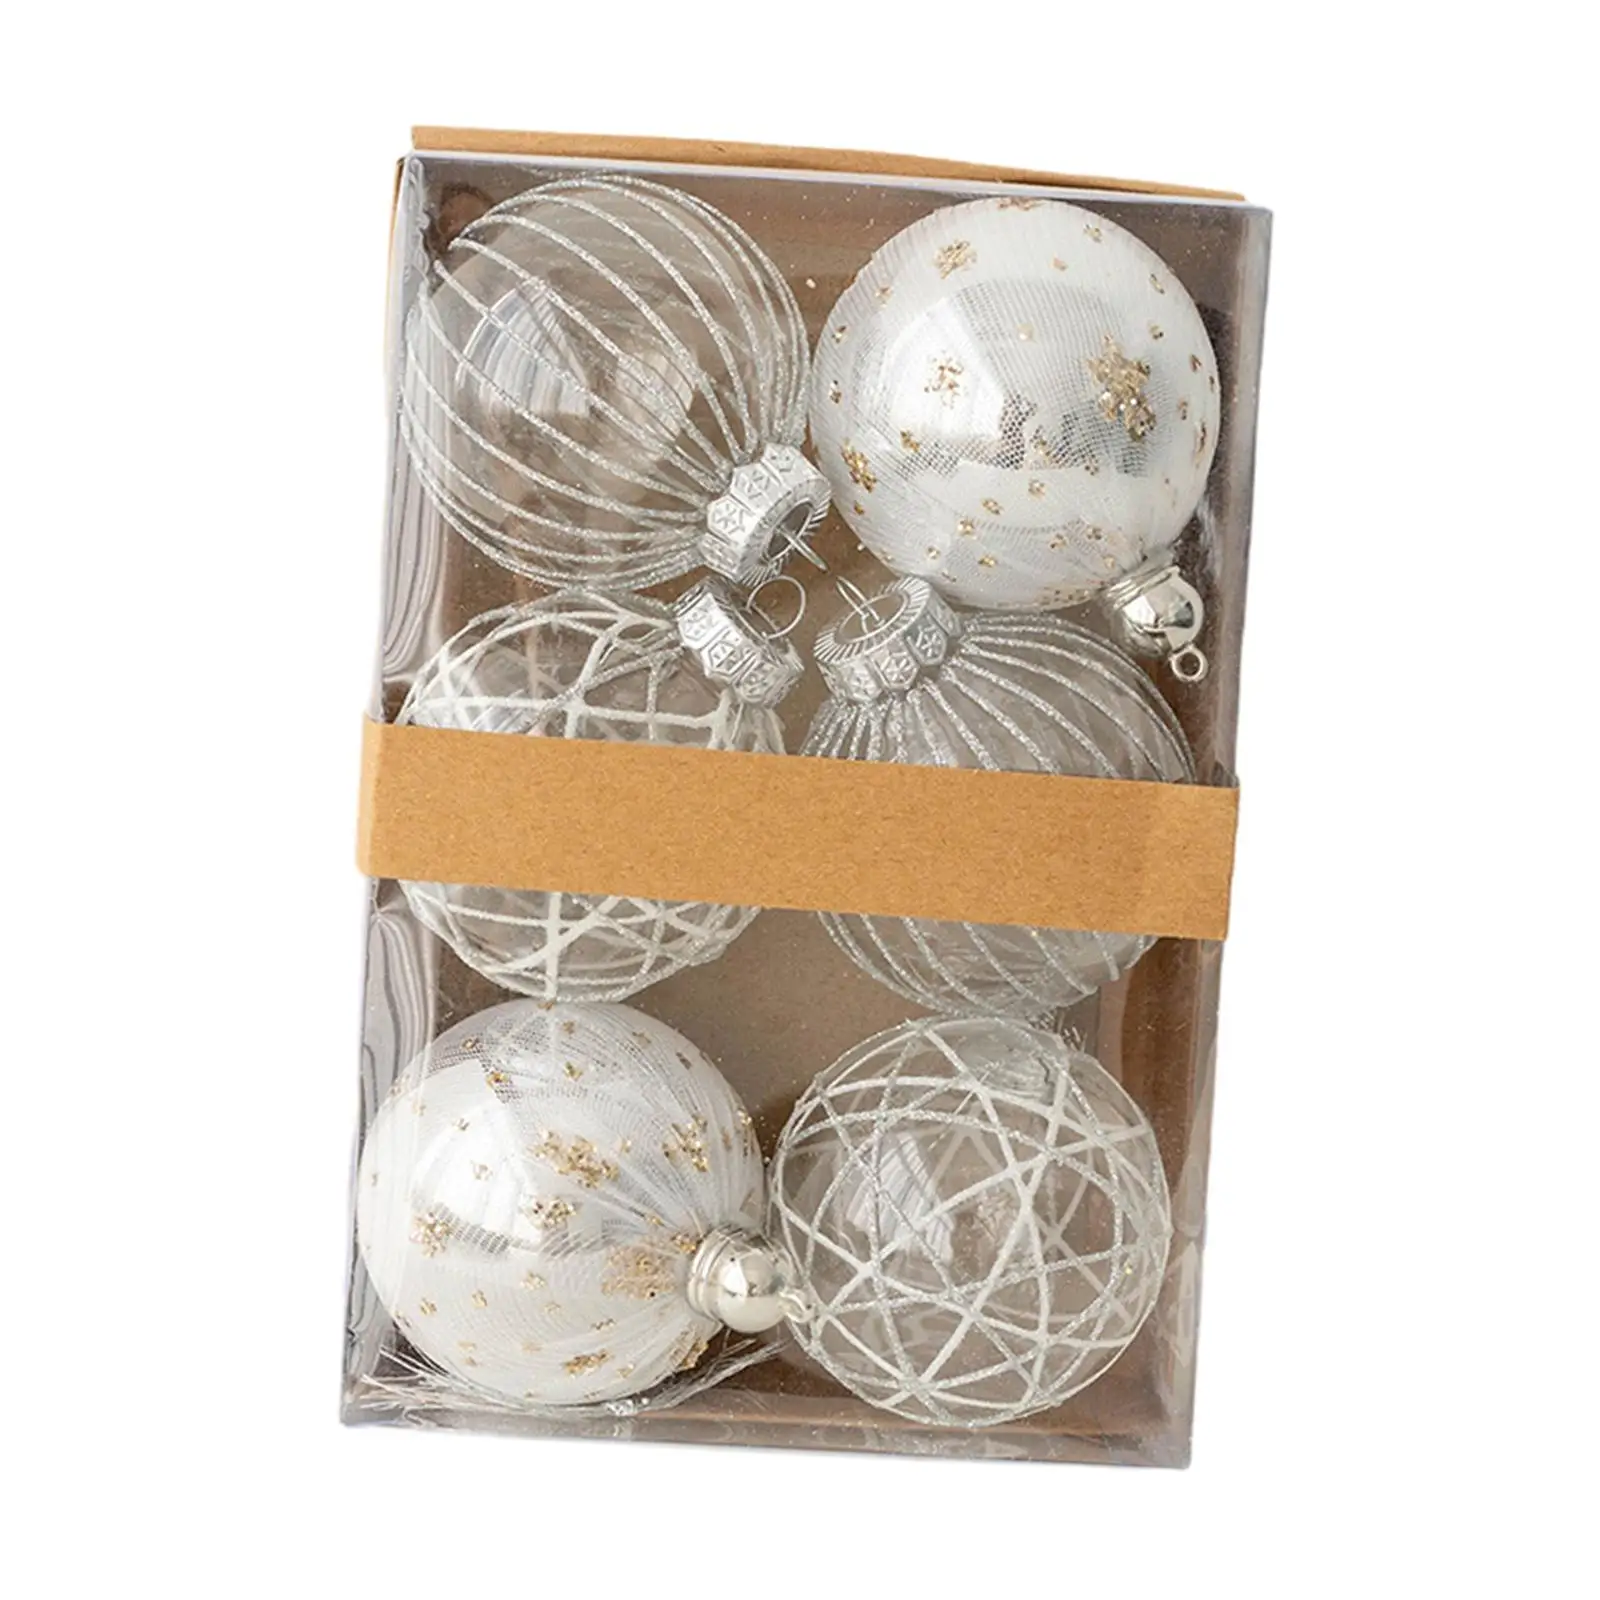 6x Christmas Balls Ornaments Hanging Crafts 8cm DIY with Hanging Loop Christmas Baubles for Halloween Party New Year